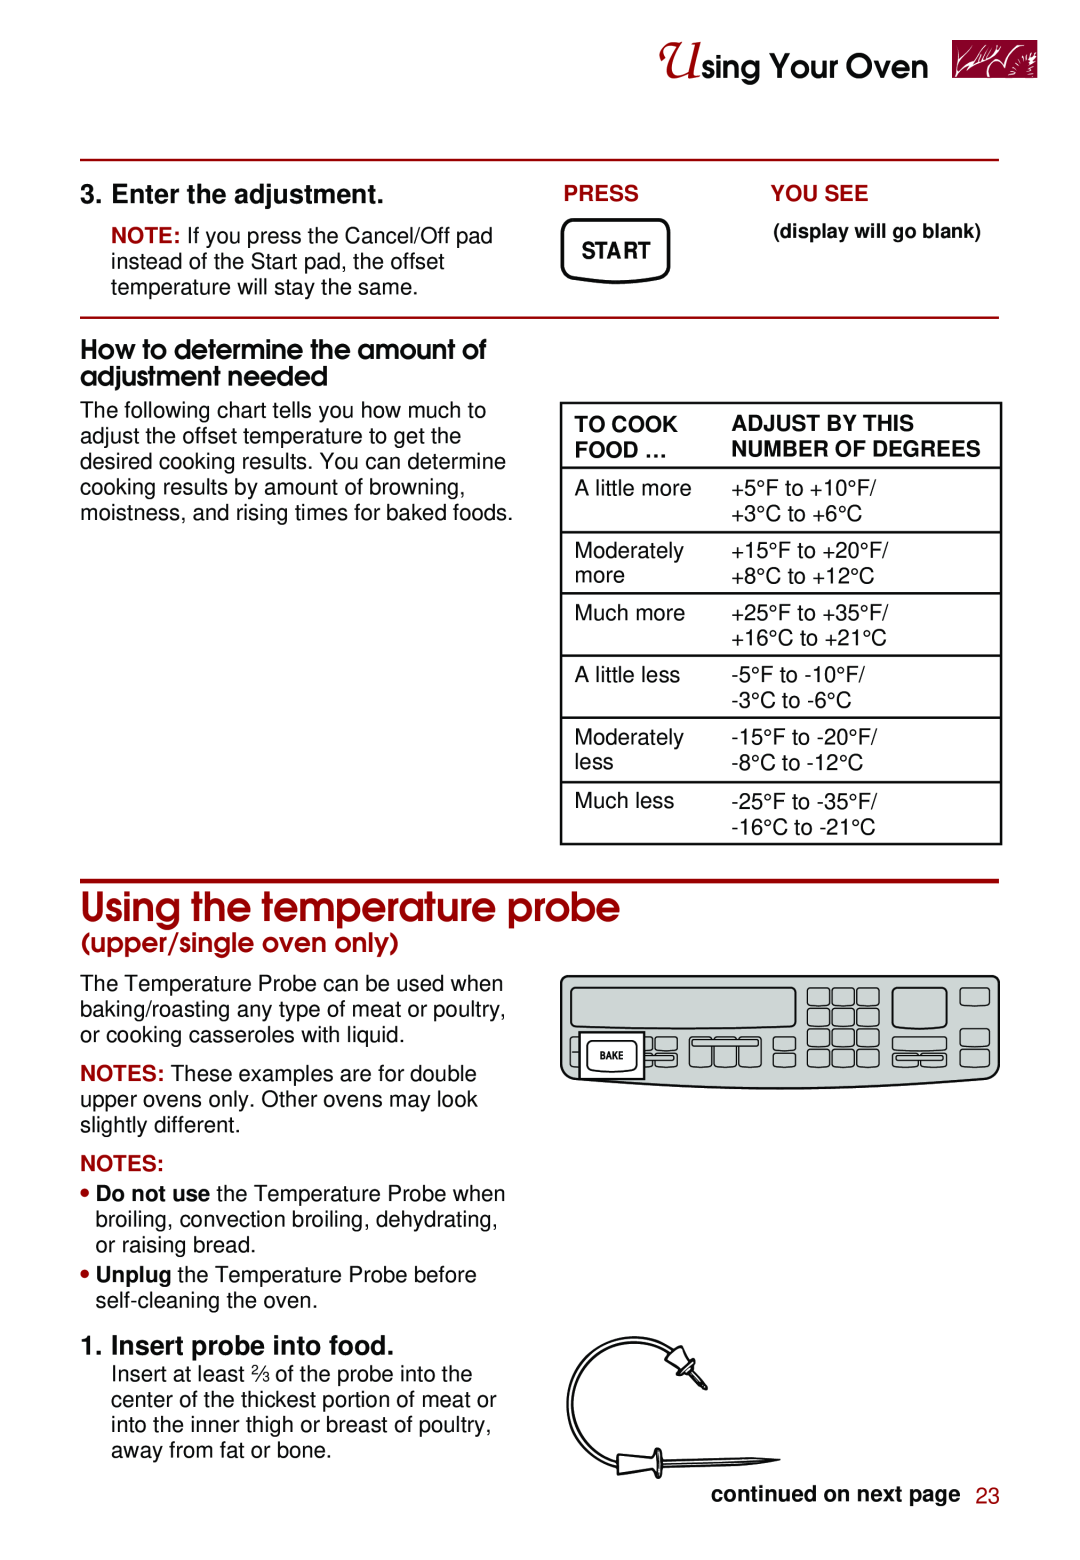 Whirlpool KEBS207D Using the temperature probe, Enter the adjustment, How to determine the amount of adjustment needed 